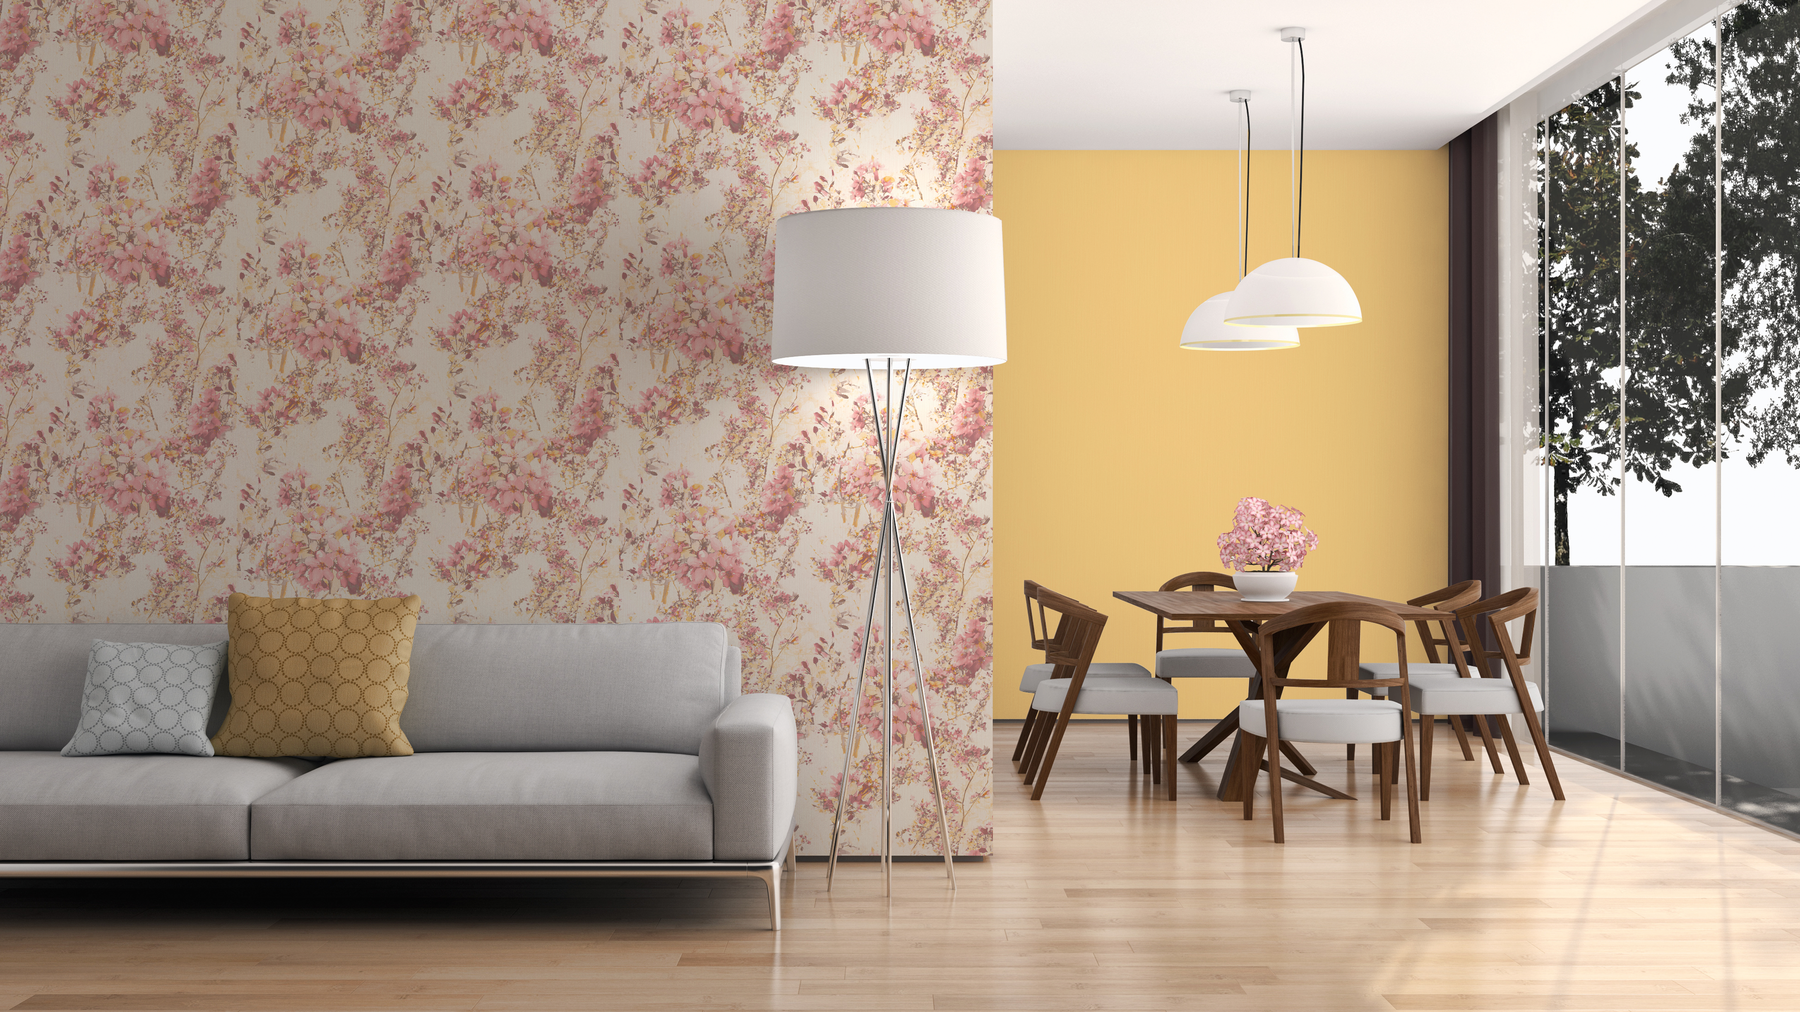             Flowers non-woven wallpaper with floral motif - pink, yellow
        